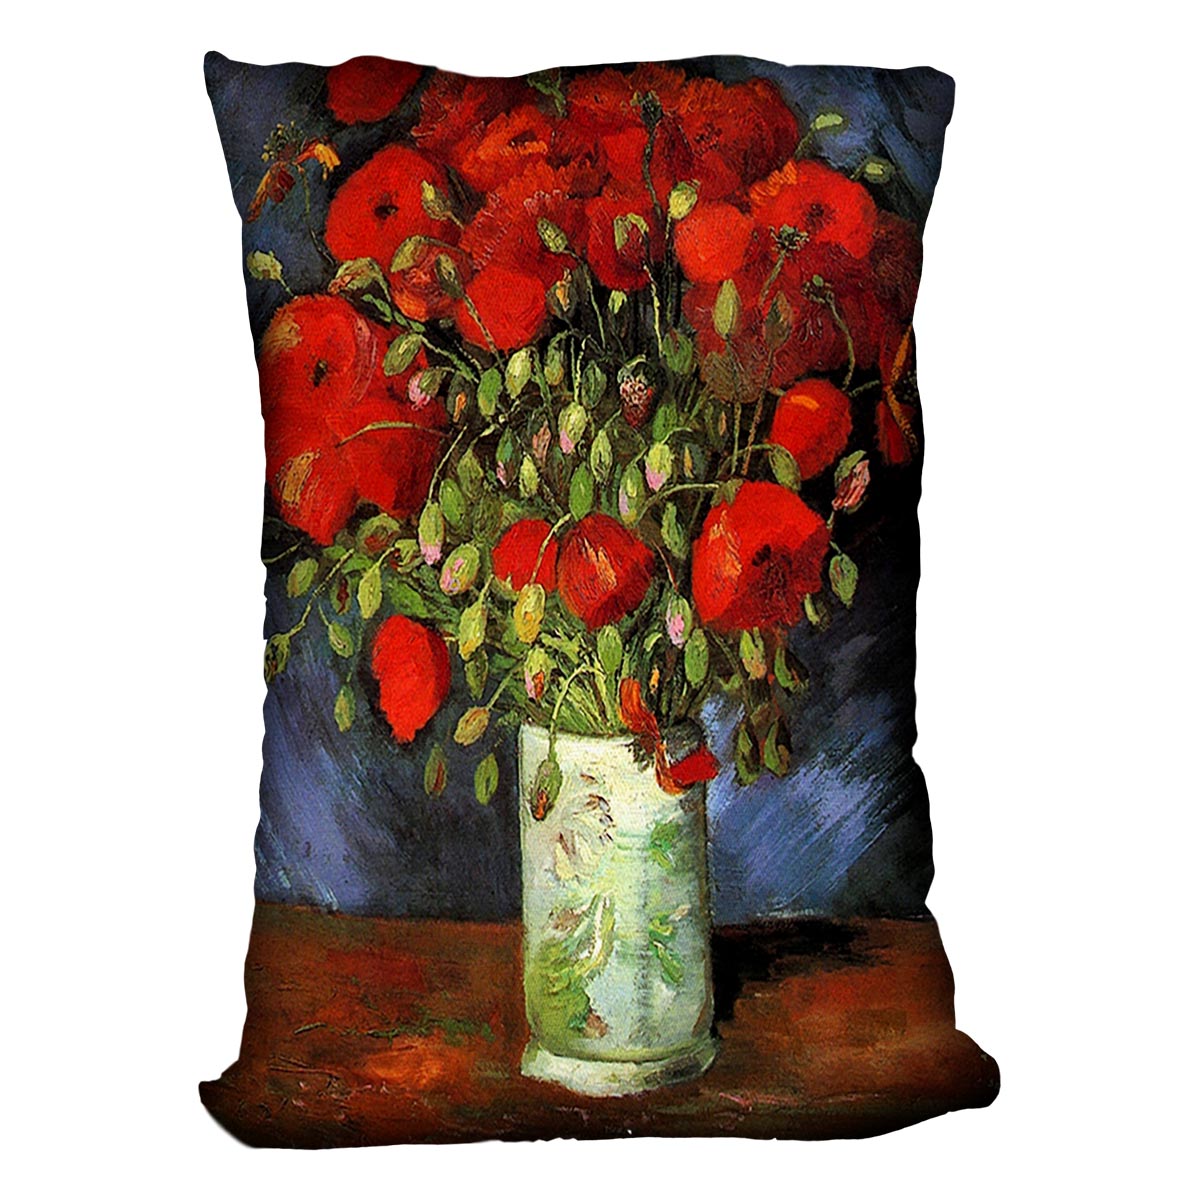 Vase with Red Poppies by Van Gogh Cushion